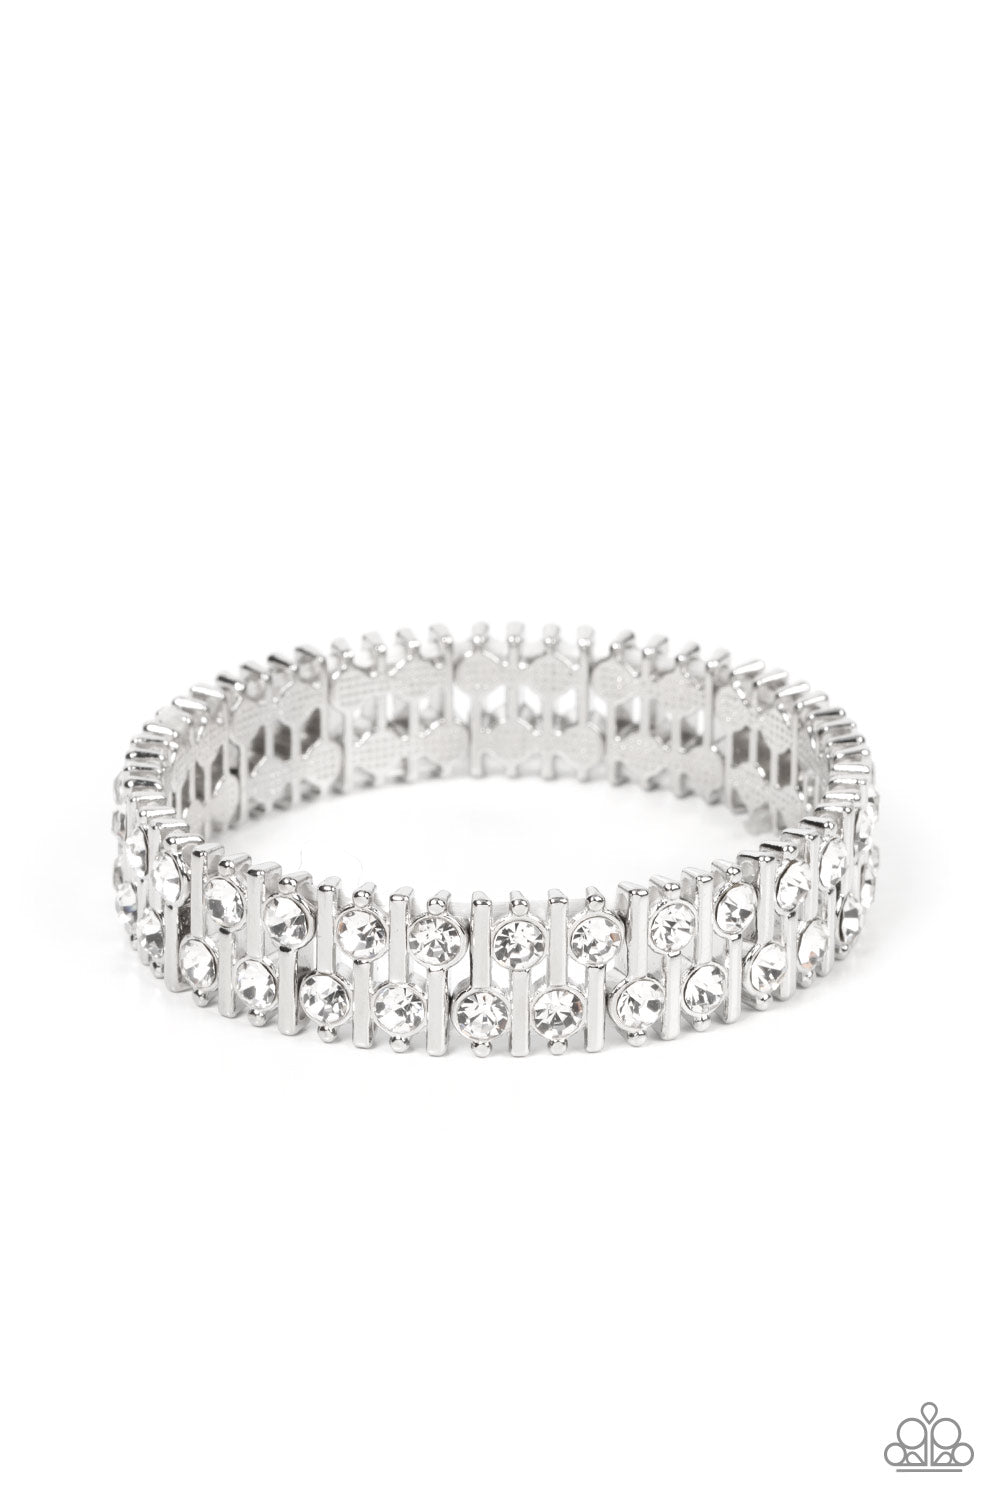 Generational Glimmer White Bracelet - Paparazzi Accessories  Attached to silver bars, a staggered display of solitaire white rhinestones alternates along a stretchy band around the wrist for an unexpected pop of shimmer around the wrist.  Sold as one individual bracelet.